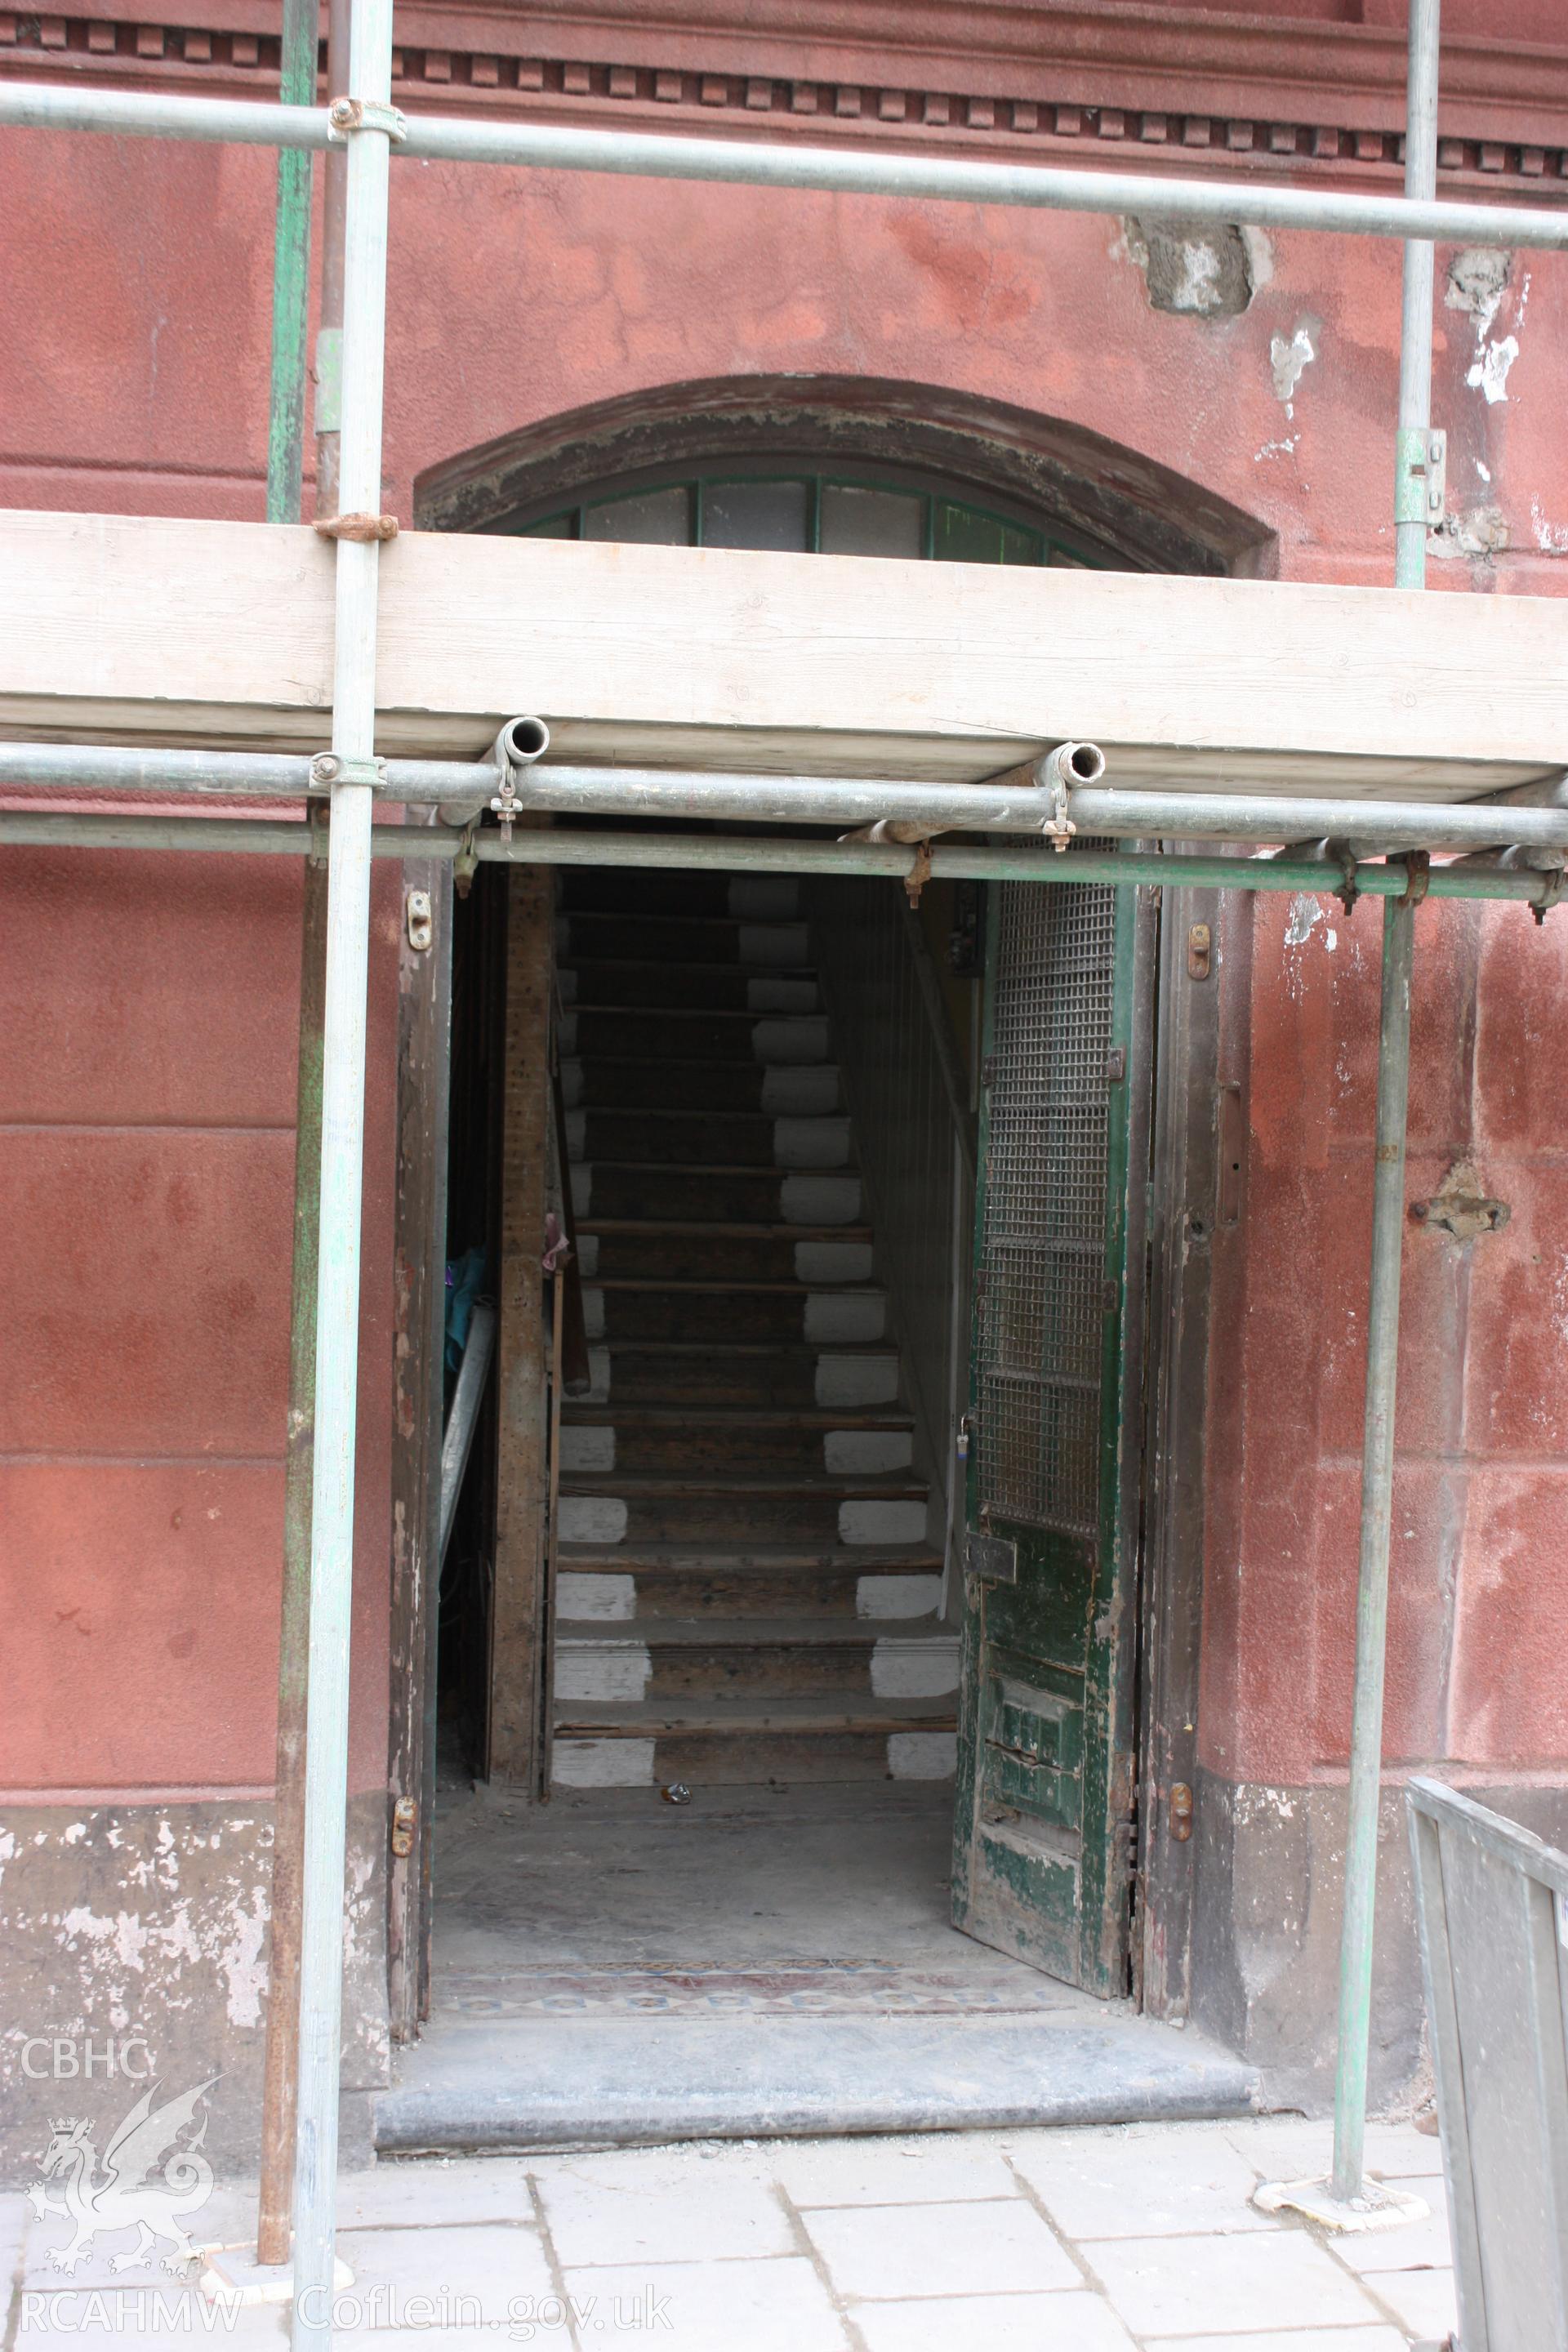 Colour photograph showing interior stairs leading from ground to first floor at the Old Auction Rooms/ Liberal Club in Aberystwyth. Photographic survey conducted by Geoff Ward on 9th June 2010 during repair work prior to conversion into flats.